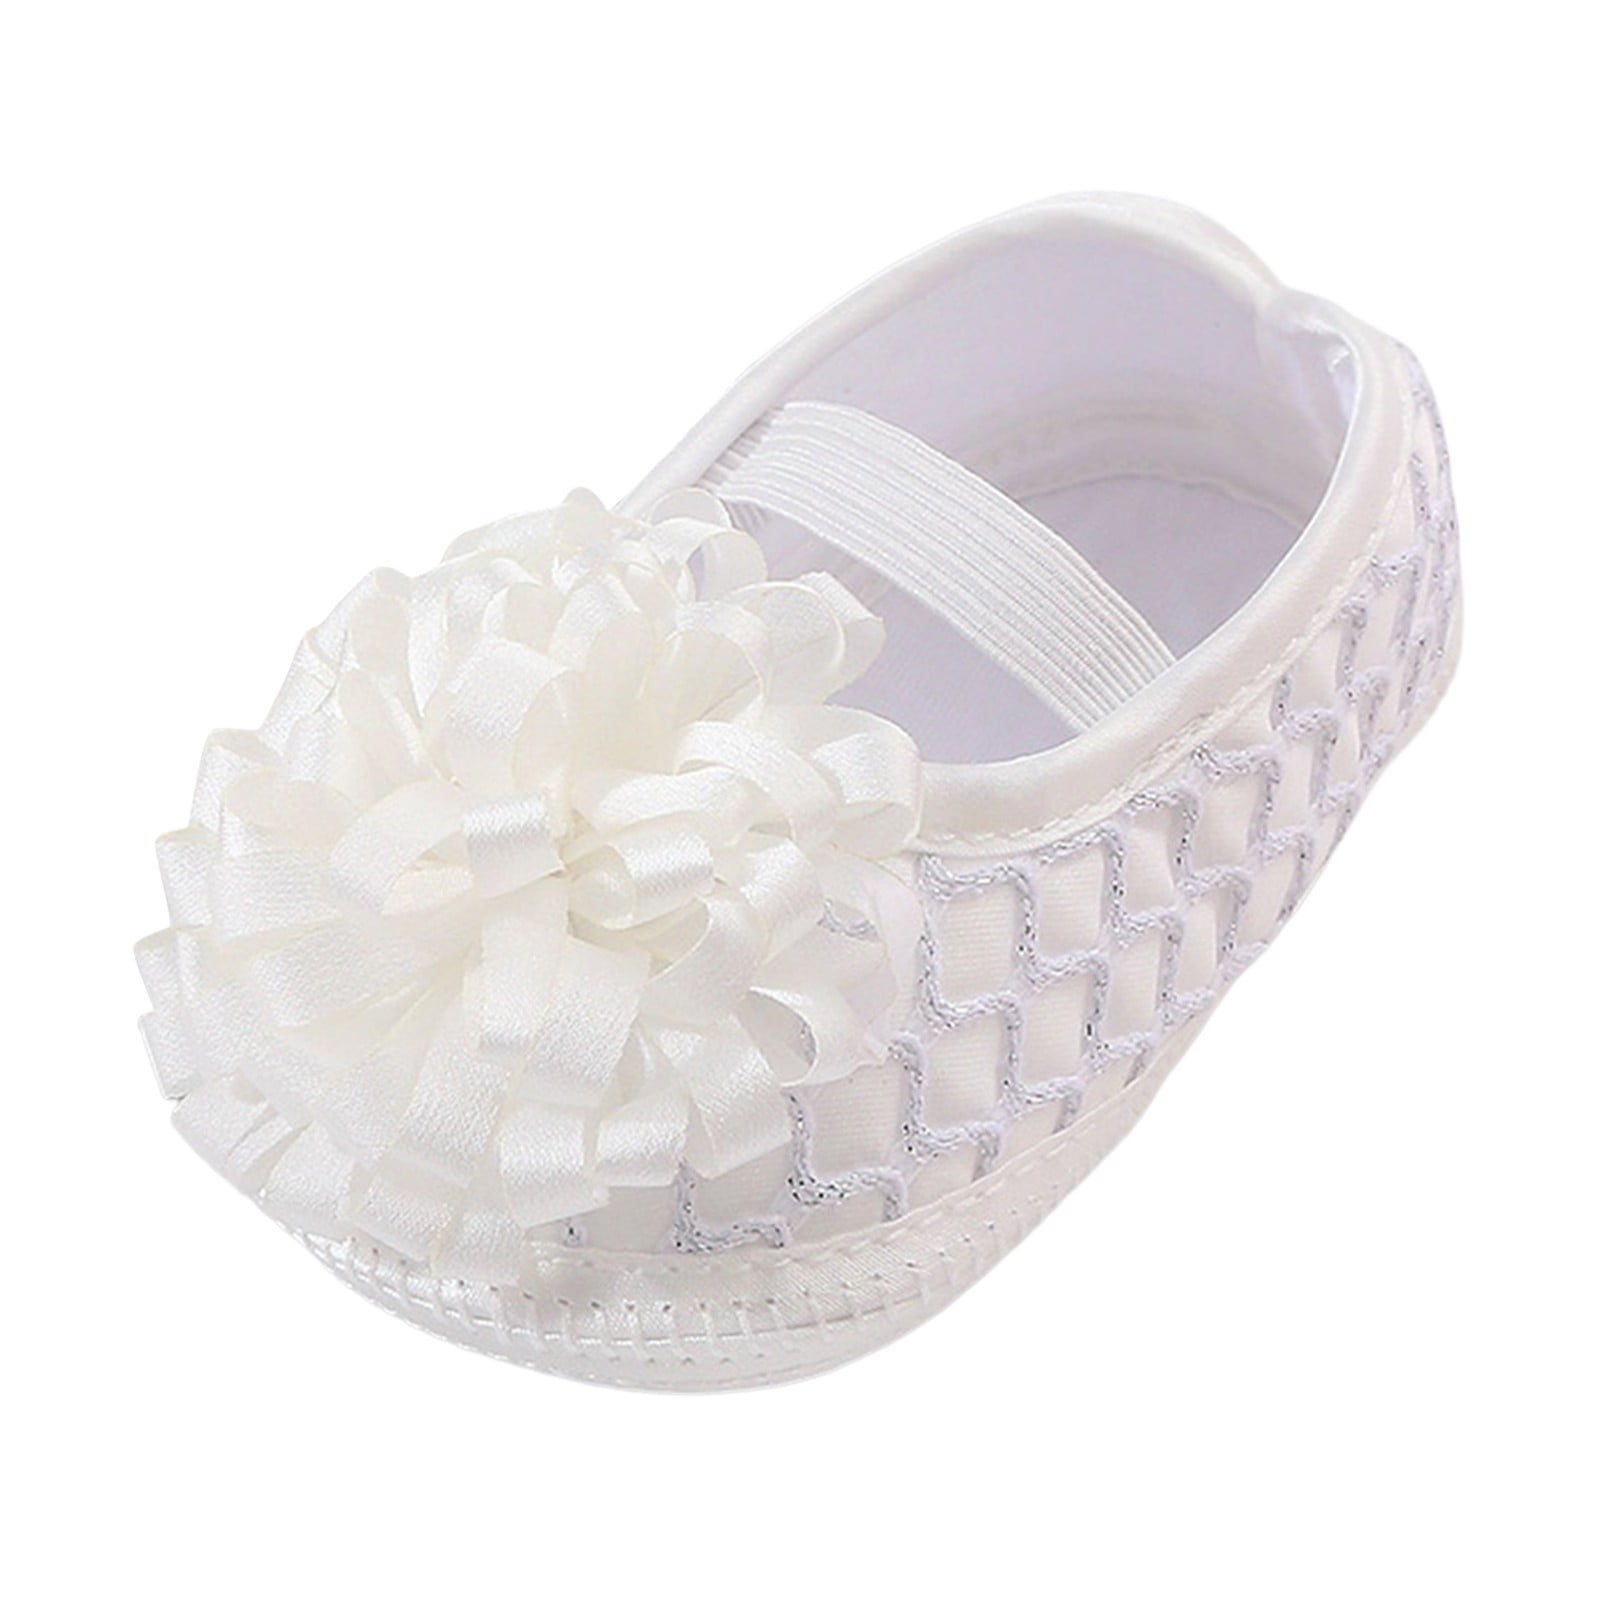 dmqupv Girls Size 3 Ballerina Slippers Cute Baby Princess Shoes With ...